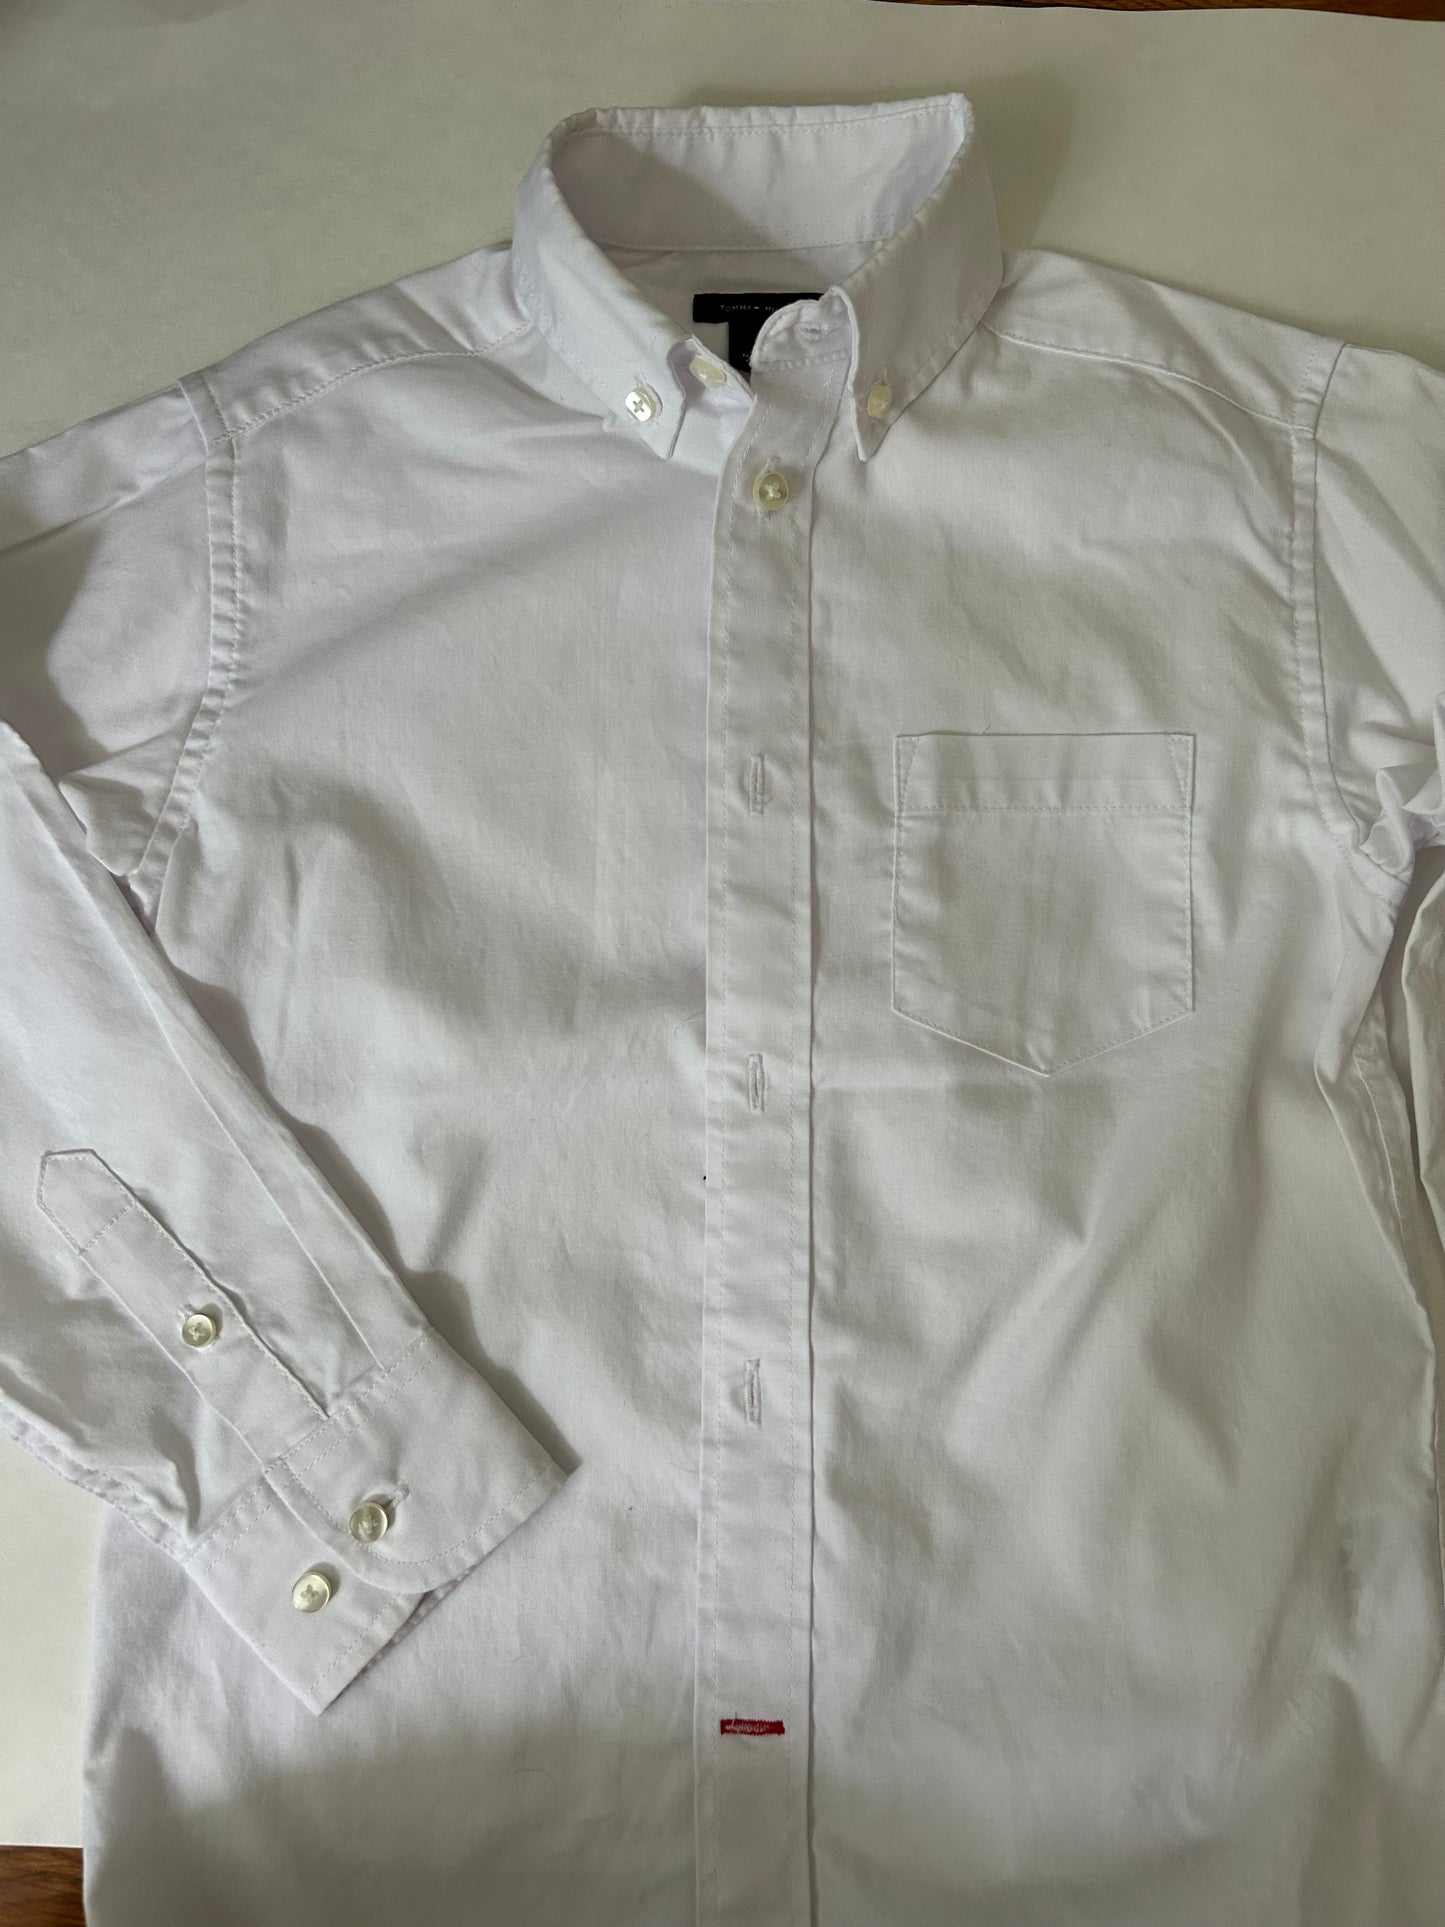 Boys size 8 Tommy Hilfiger white collared dress shirt